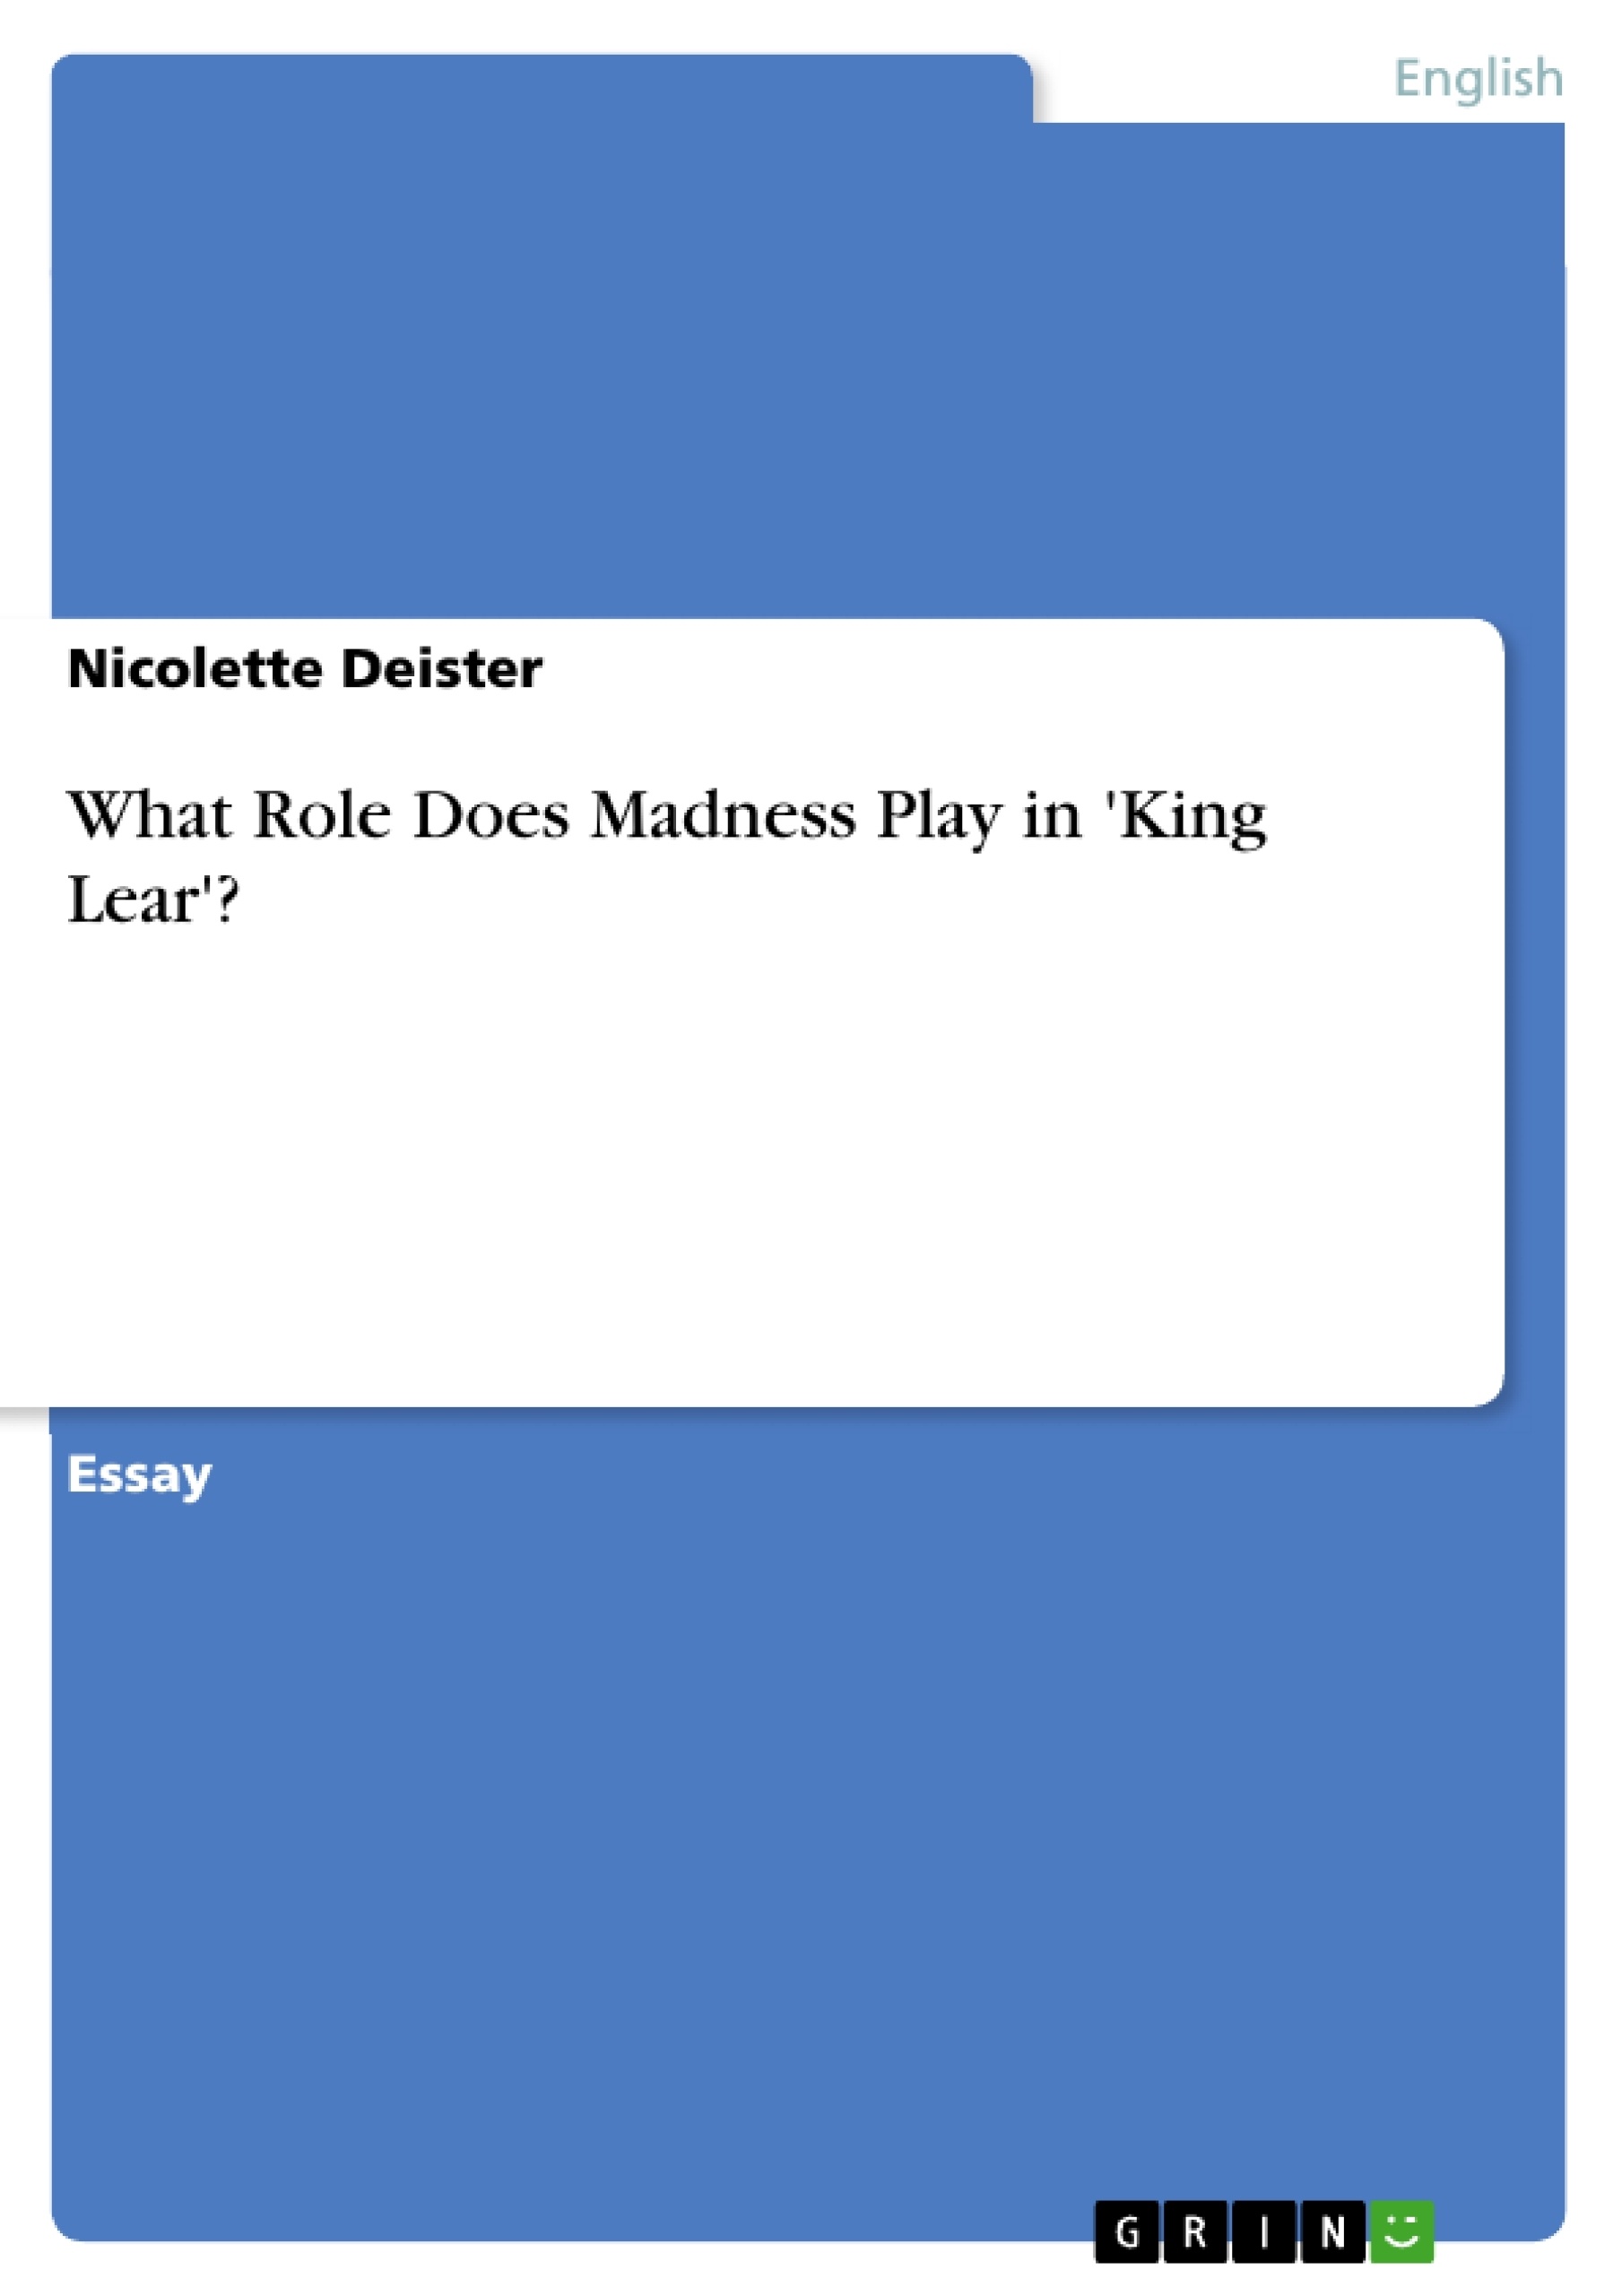 Title: What Role Does Madness Play in 'King Lear'?